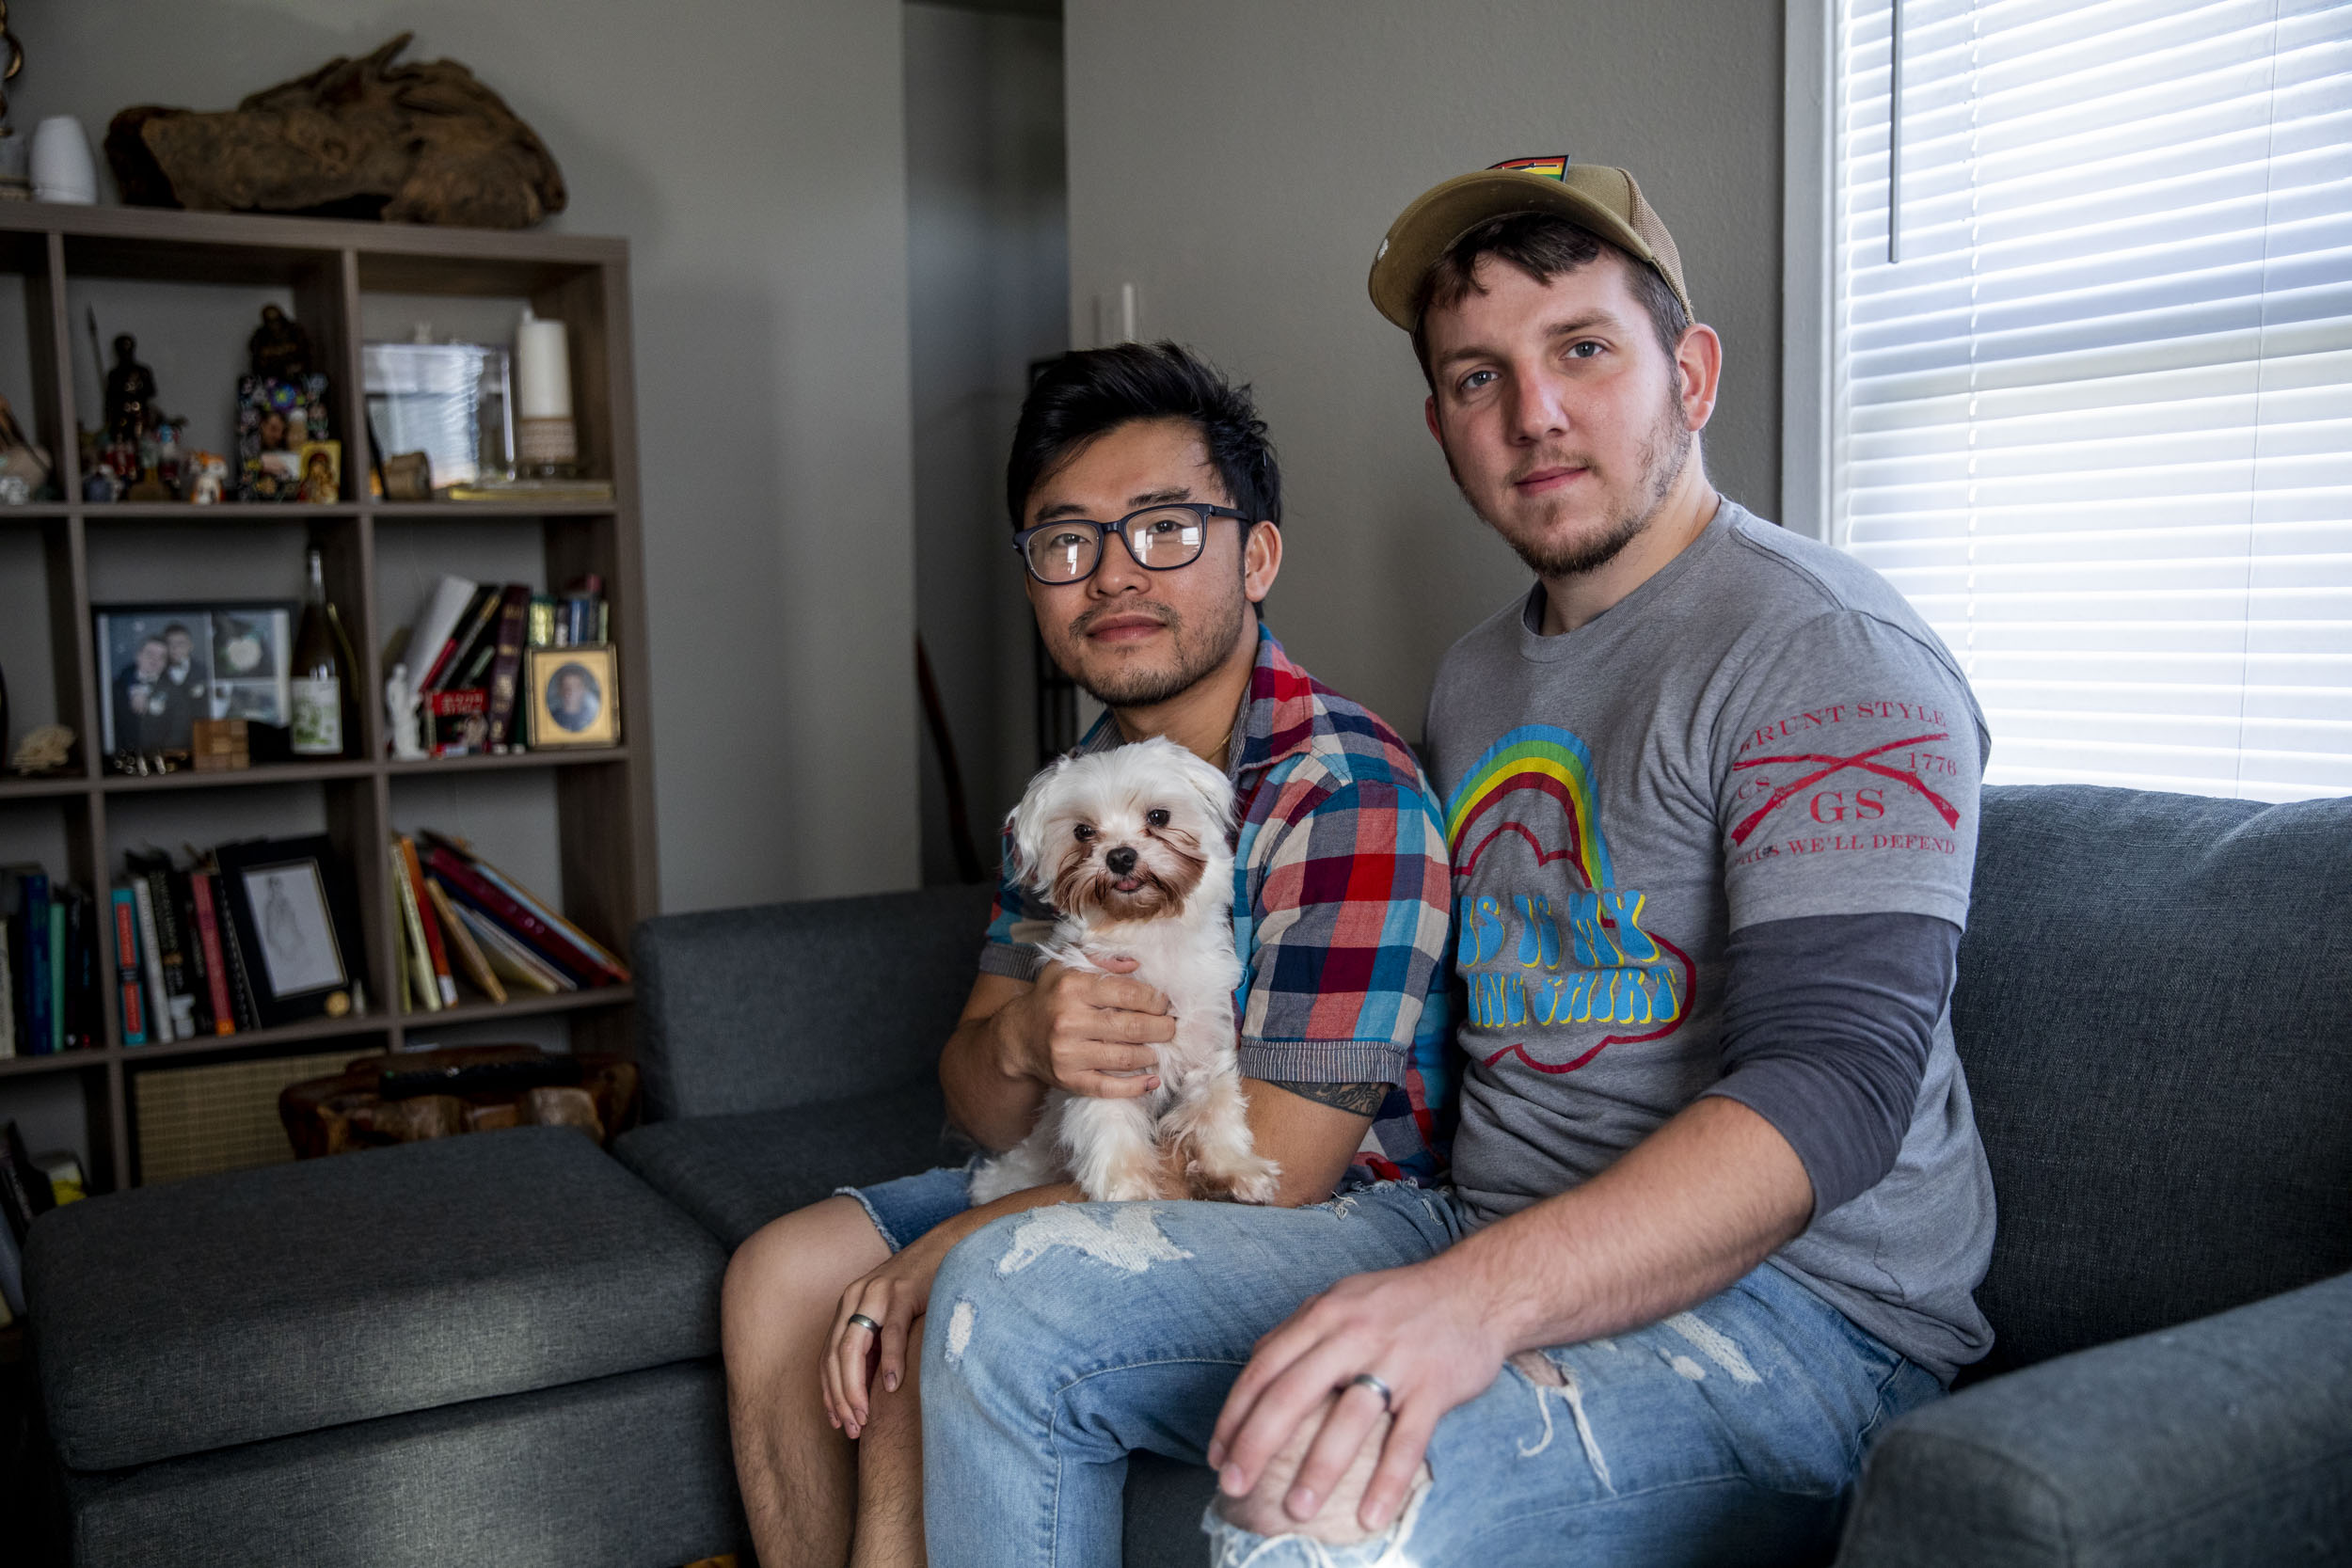 Pink Pistols administrator John Abbitt, right, and his husband Victor Chu in their Tacoma home on May 18, 2019. Though Chu is less involved with Pink Pistols than his husband and didn’t grow up with guns, he now owns his own rifle. He attributes his attitude change towards guns to his husband. “Once I took a step back, I had to take a look at the intentions. Like for John, his involvement in Pink Pistols, it’s more focused on empowering people -  and let’s face it, a lot of times the LGBTQ community feels powerless in certain situations, or threatened, or at risk. They don’t feel safe,” Chu says.(Photo by Dorothy Edwards/Crosscut)